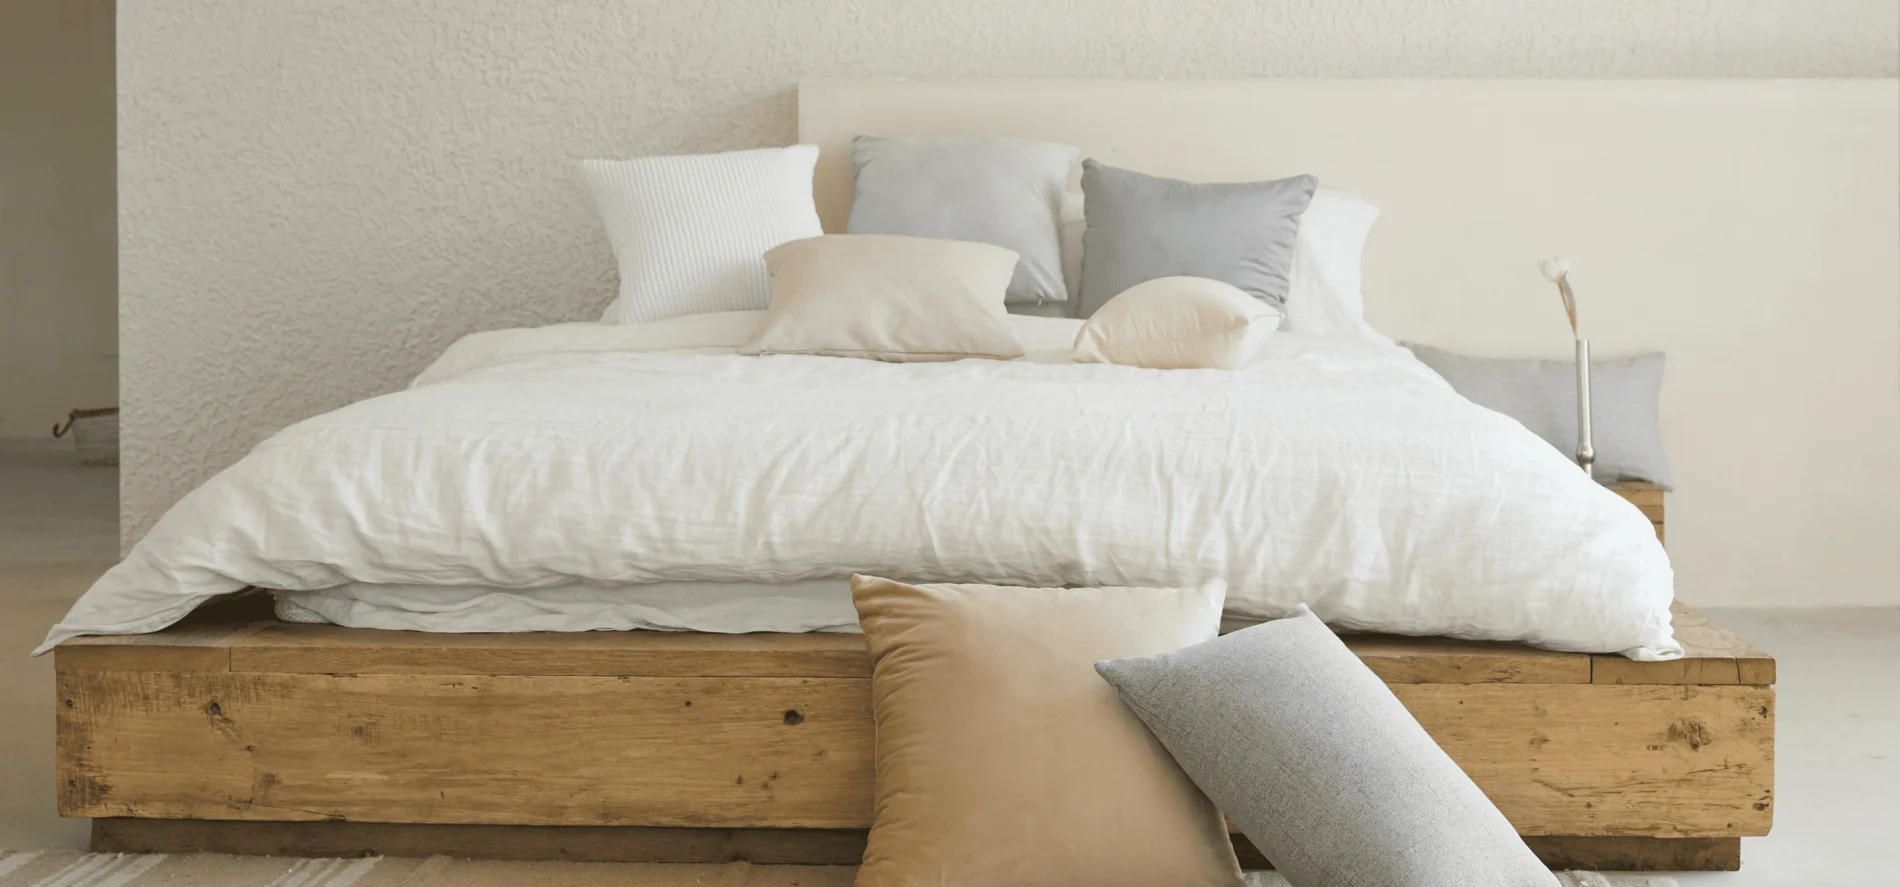 Image of a large bed with pillows on top